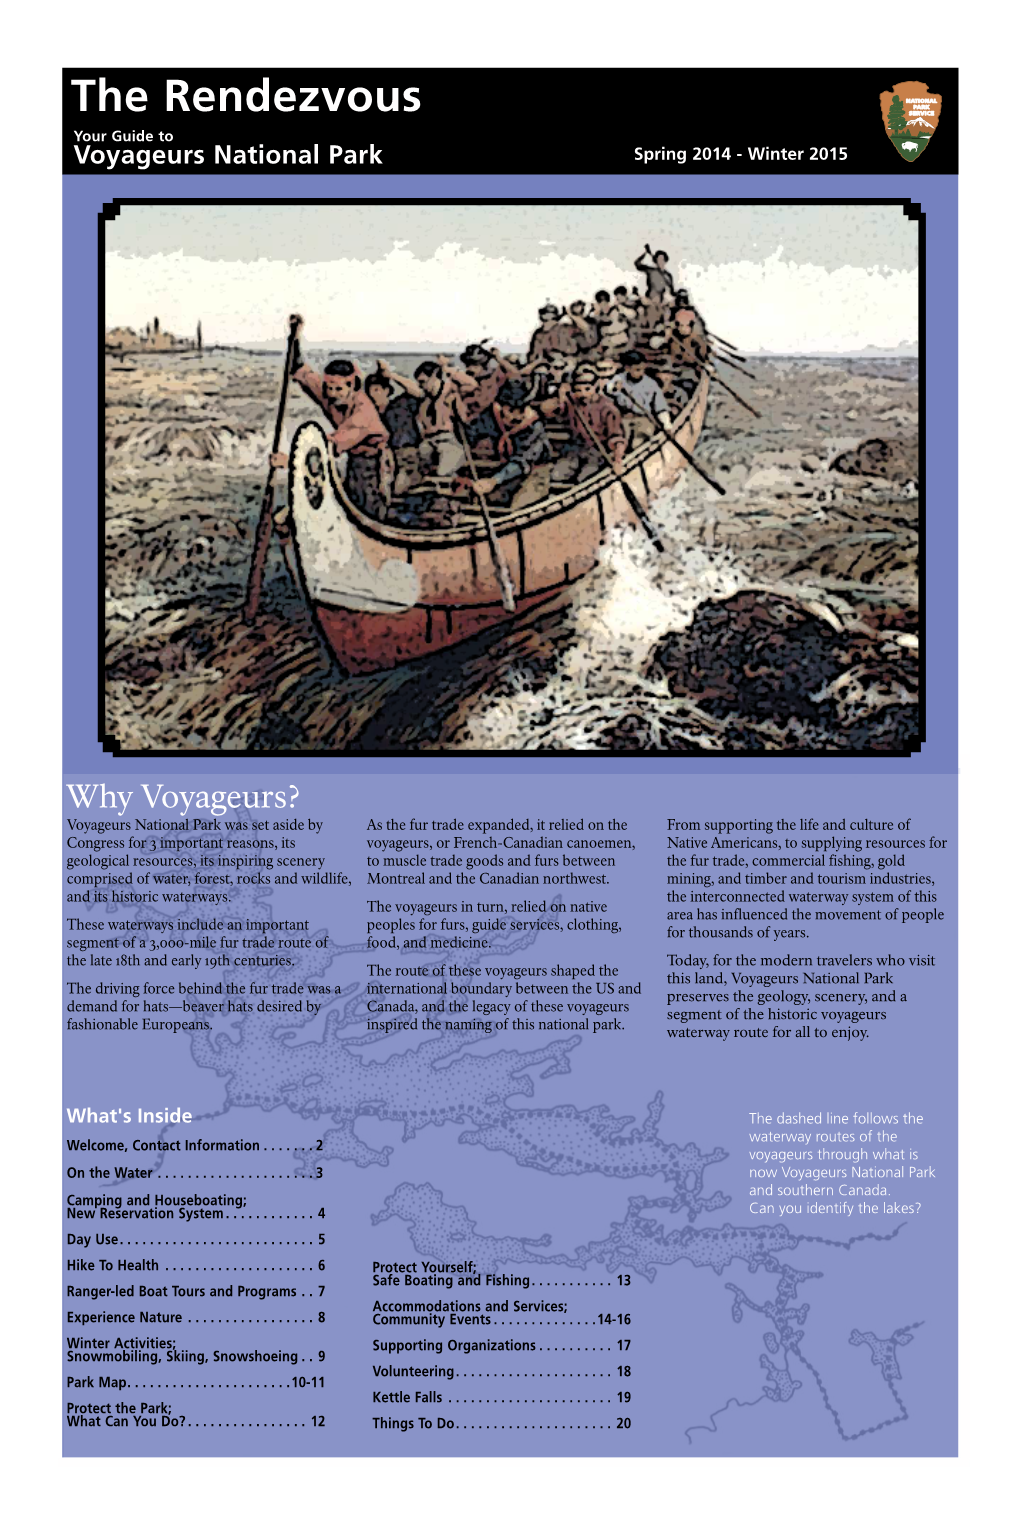 The Rendezvous Your Guide to Voyageurs National Park Spring 2014 - Winter 2015